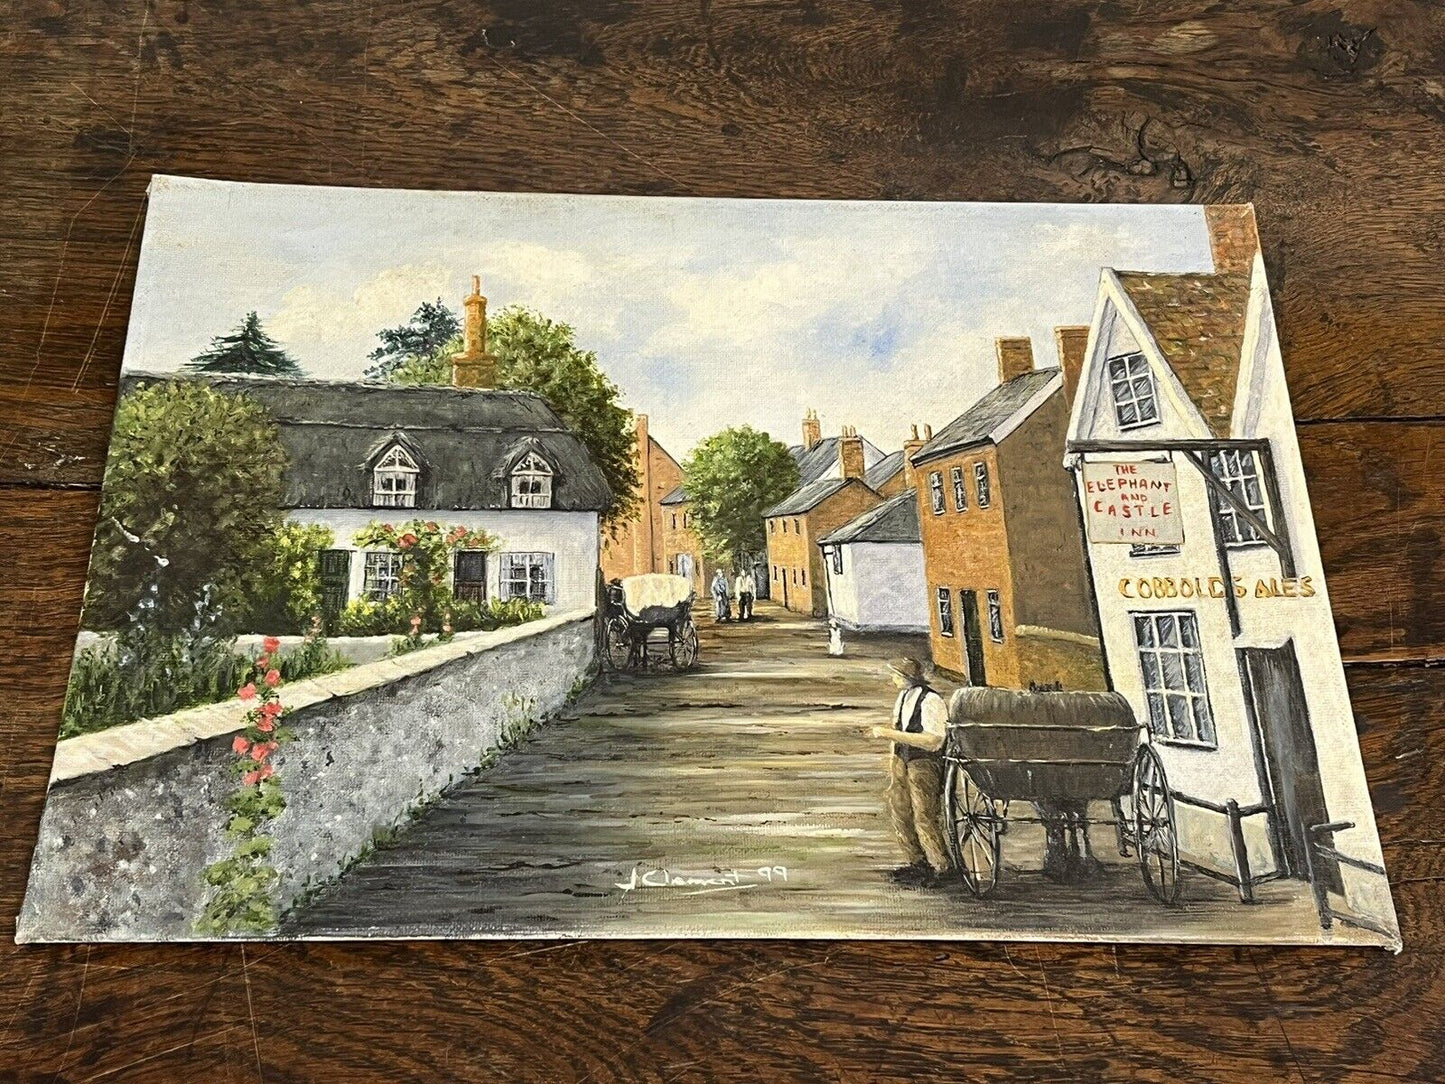 Original Signed Painting Of A English Countryside Scene